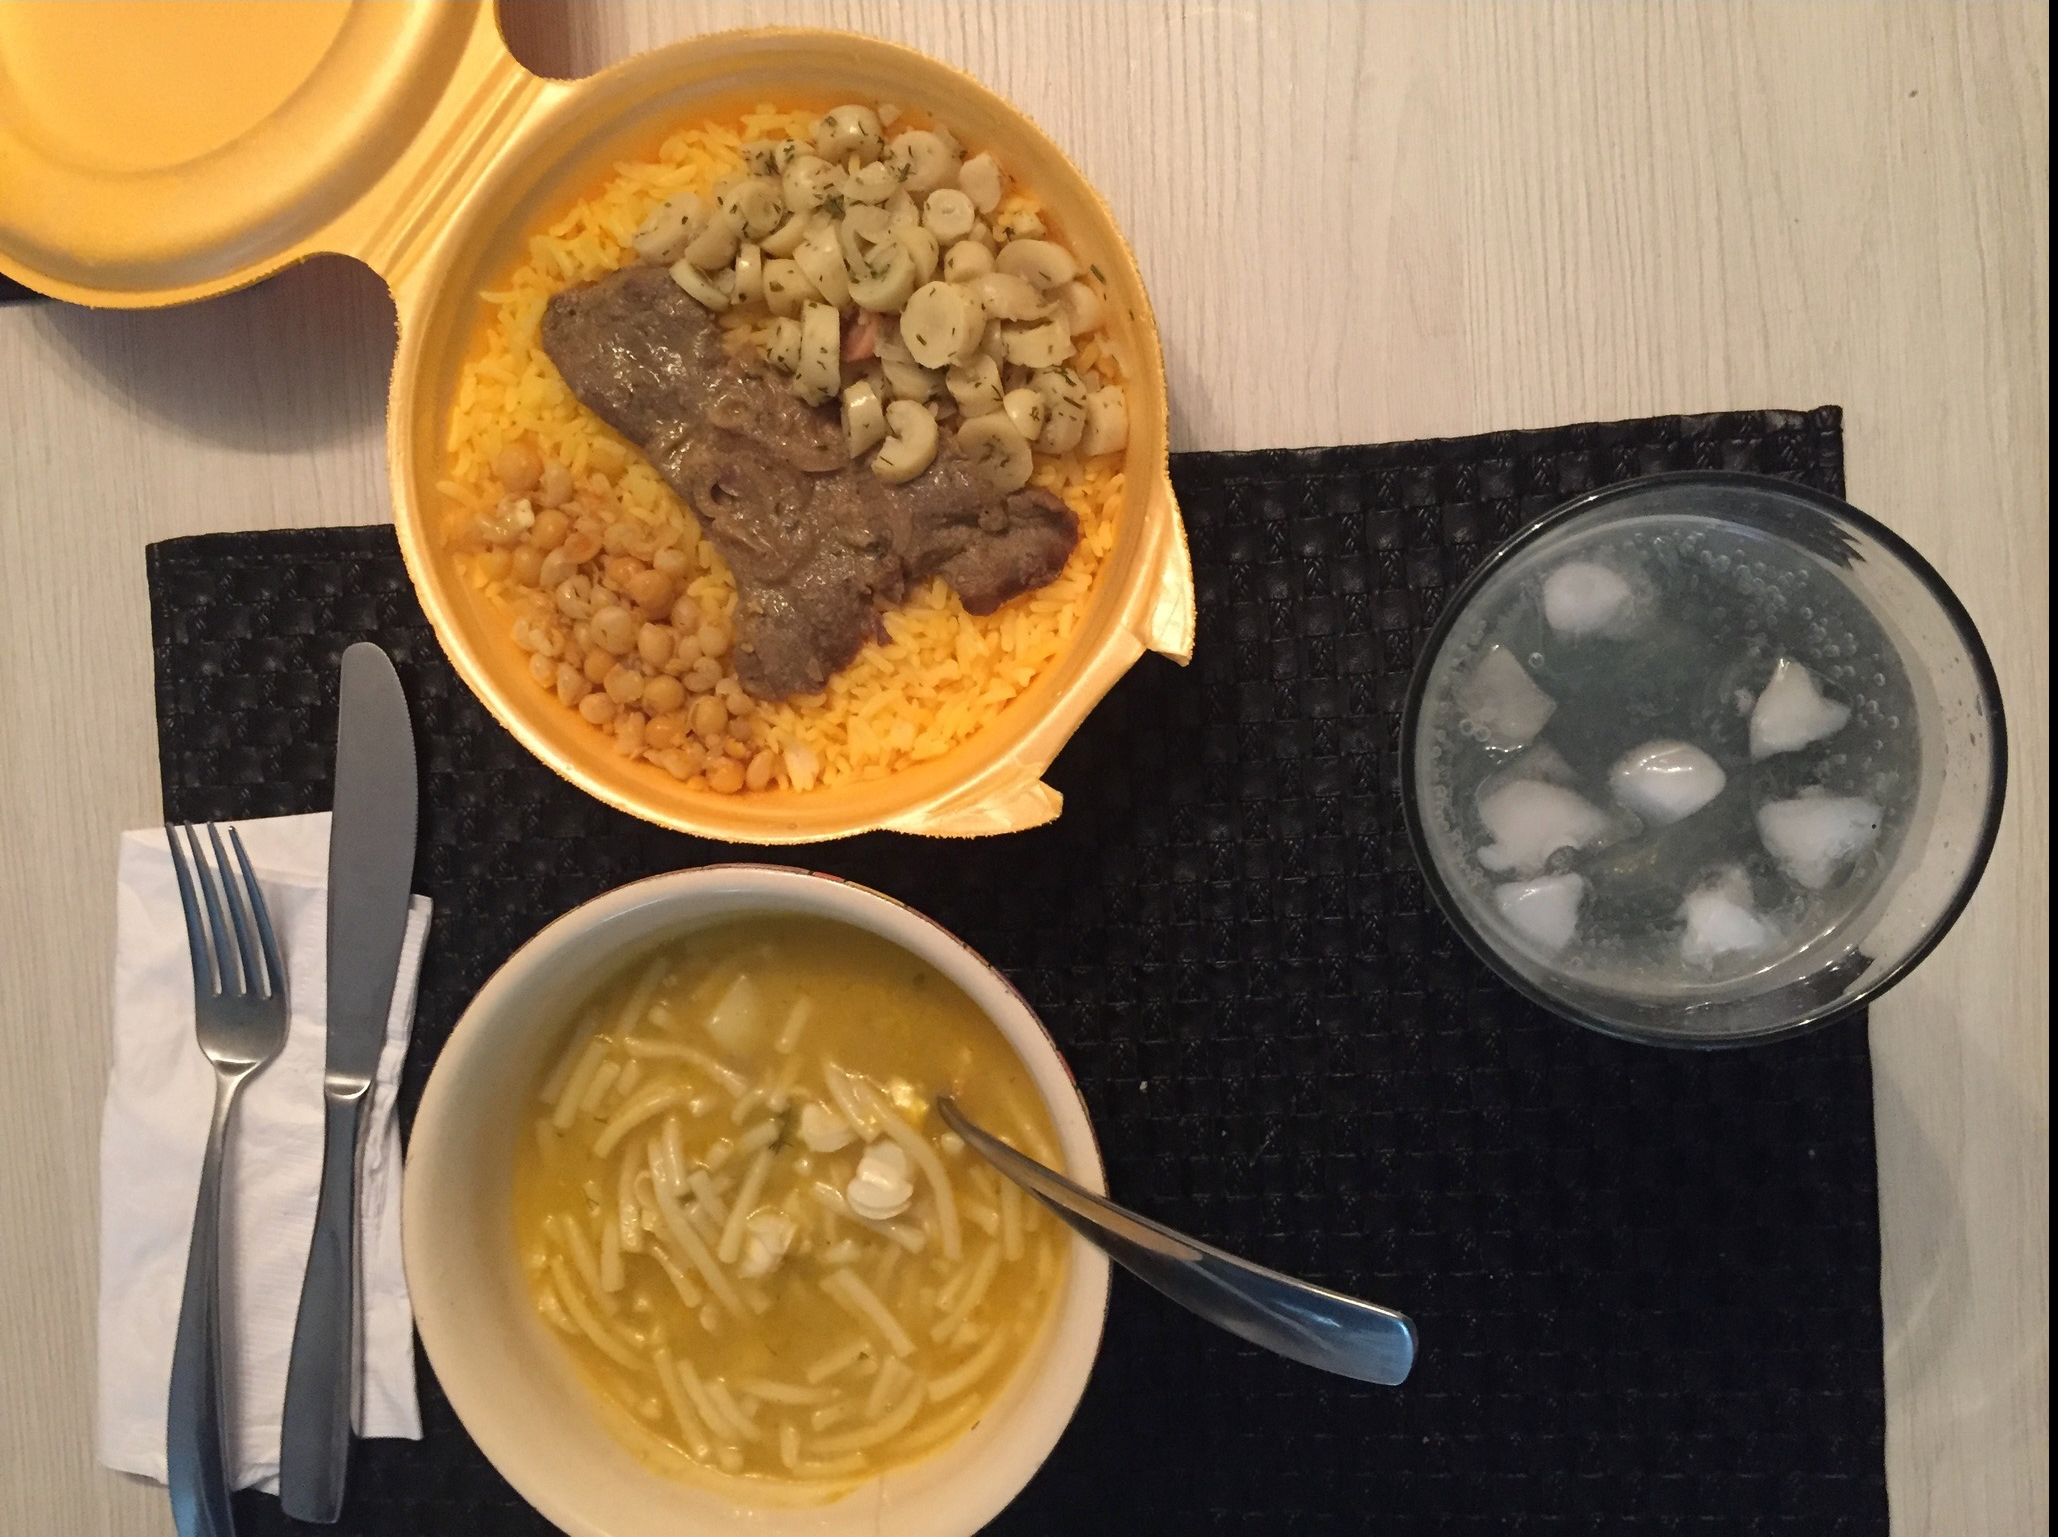 photo of a bowl of noodle soup, a plate with rice, corn, and meat, and glass of juice